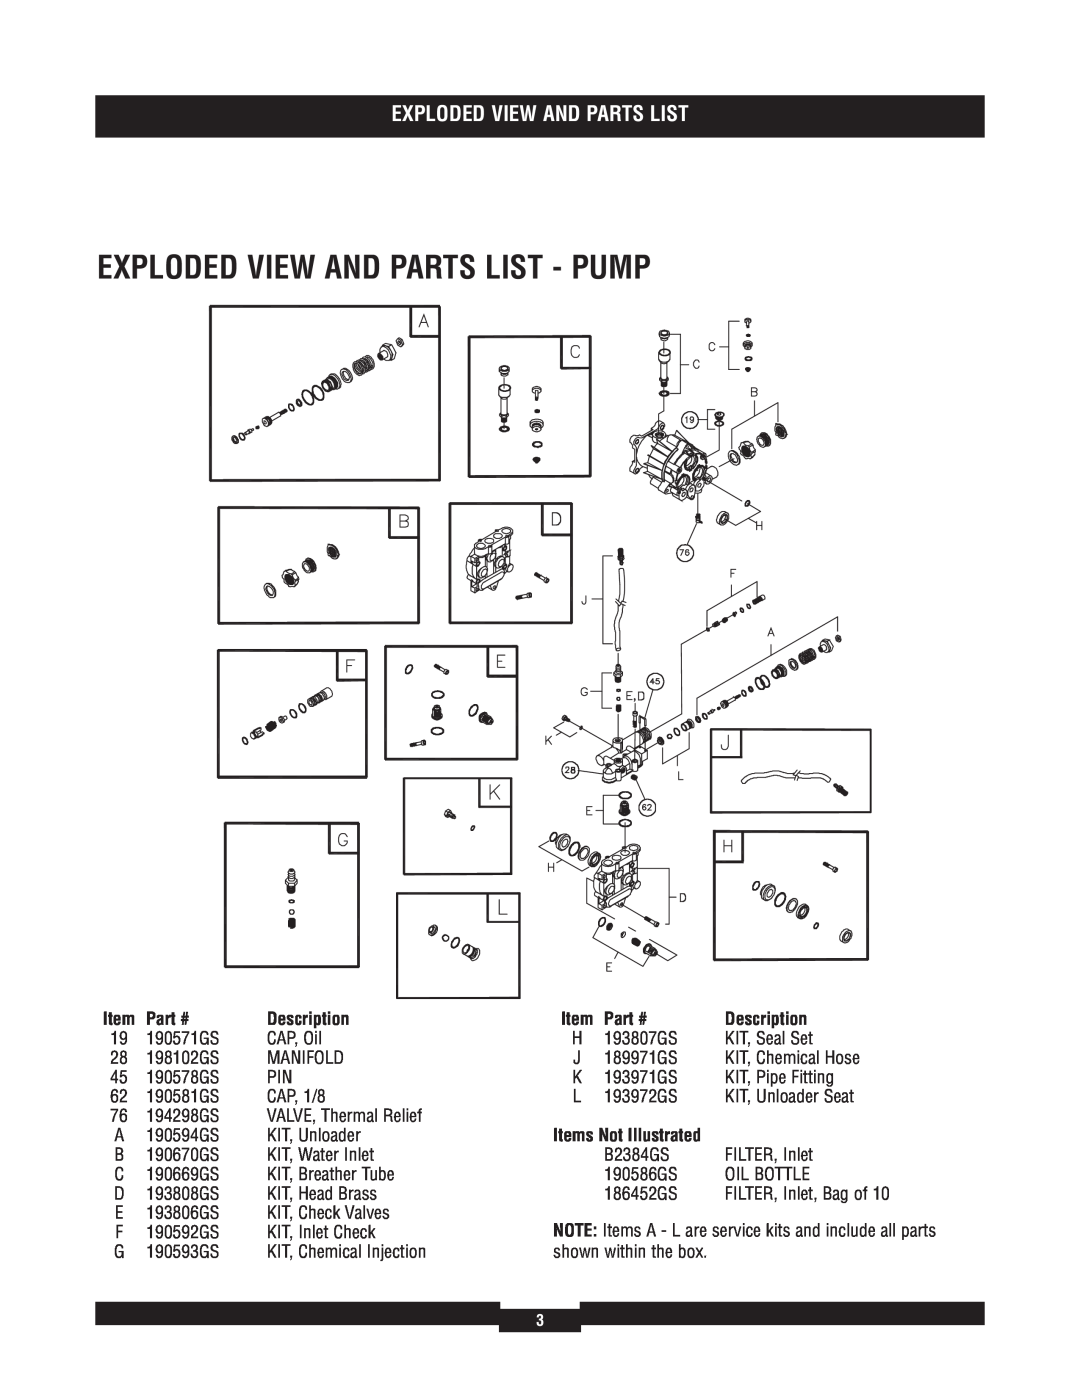 Briggs & Stratton 020224-1 manual Exploded View And Parts List - Pump, Items Not Illustrated, Part #, Description 